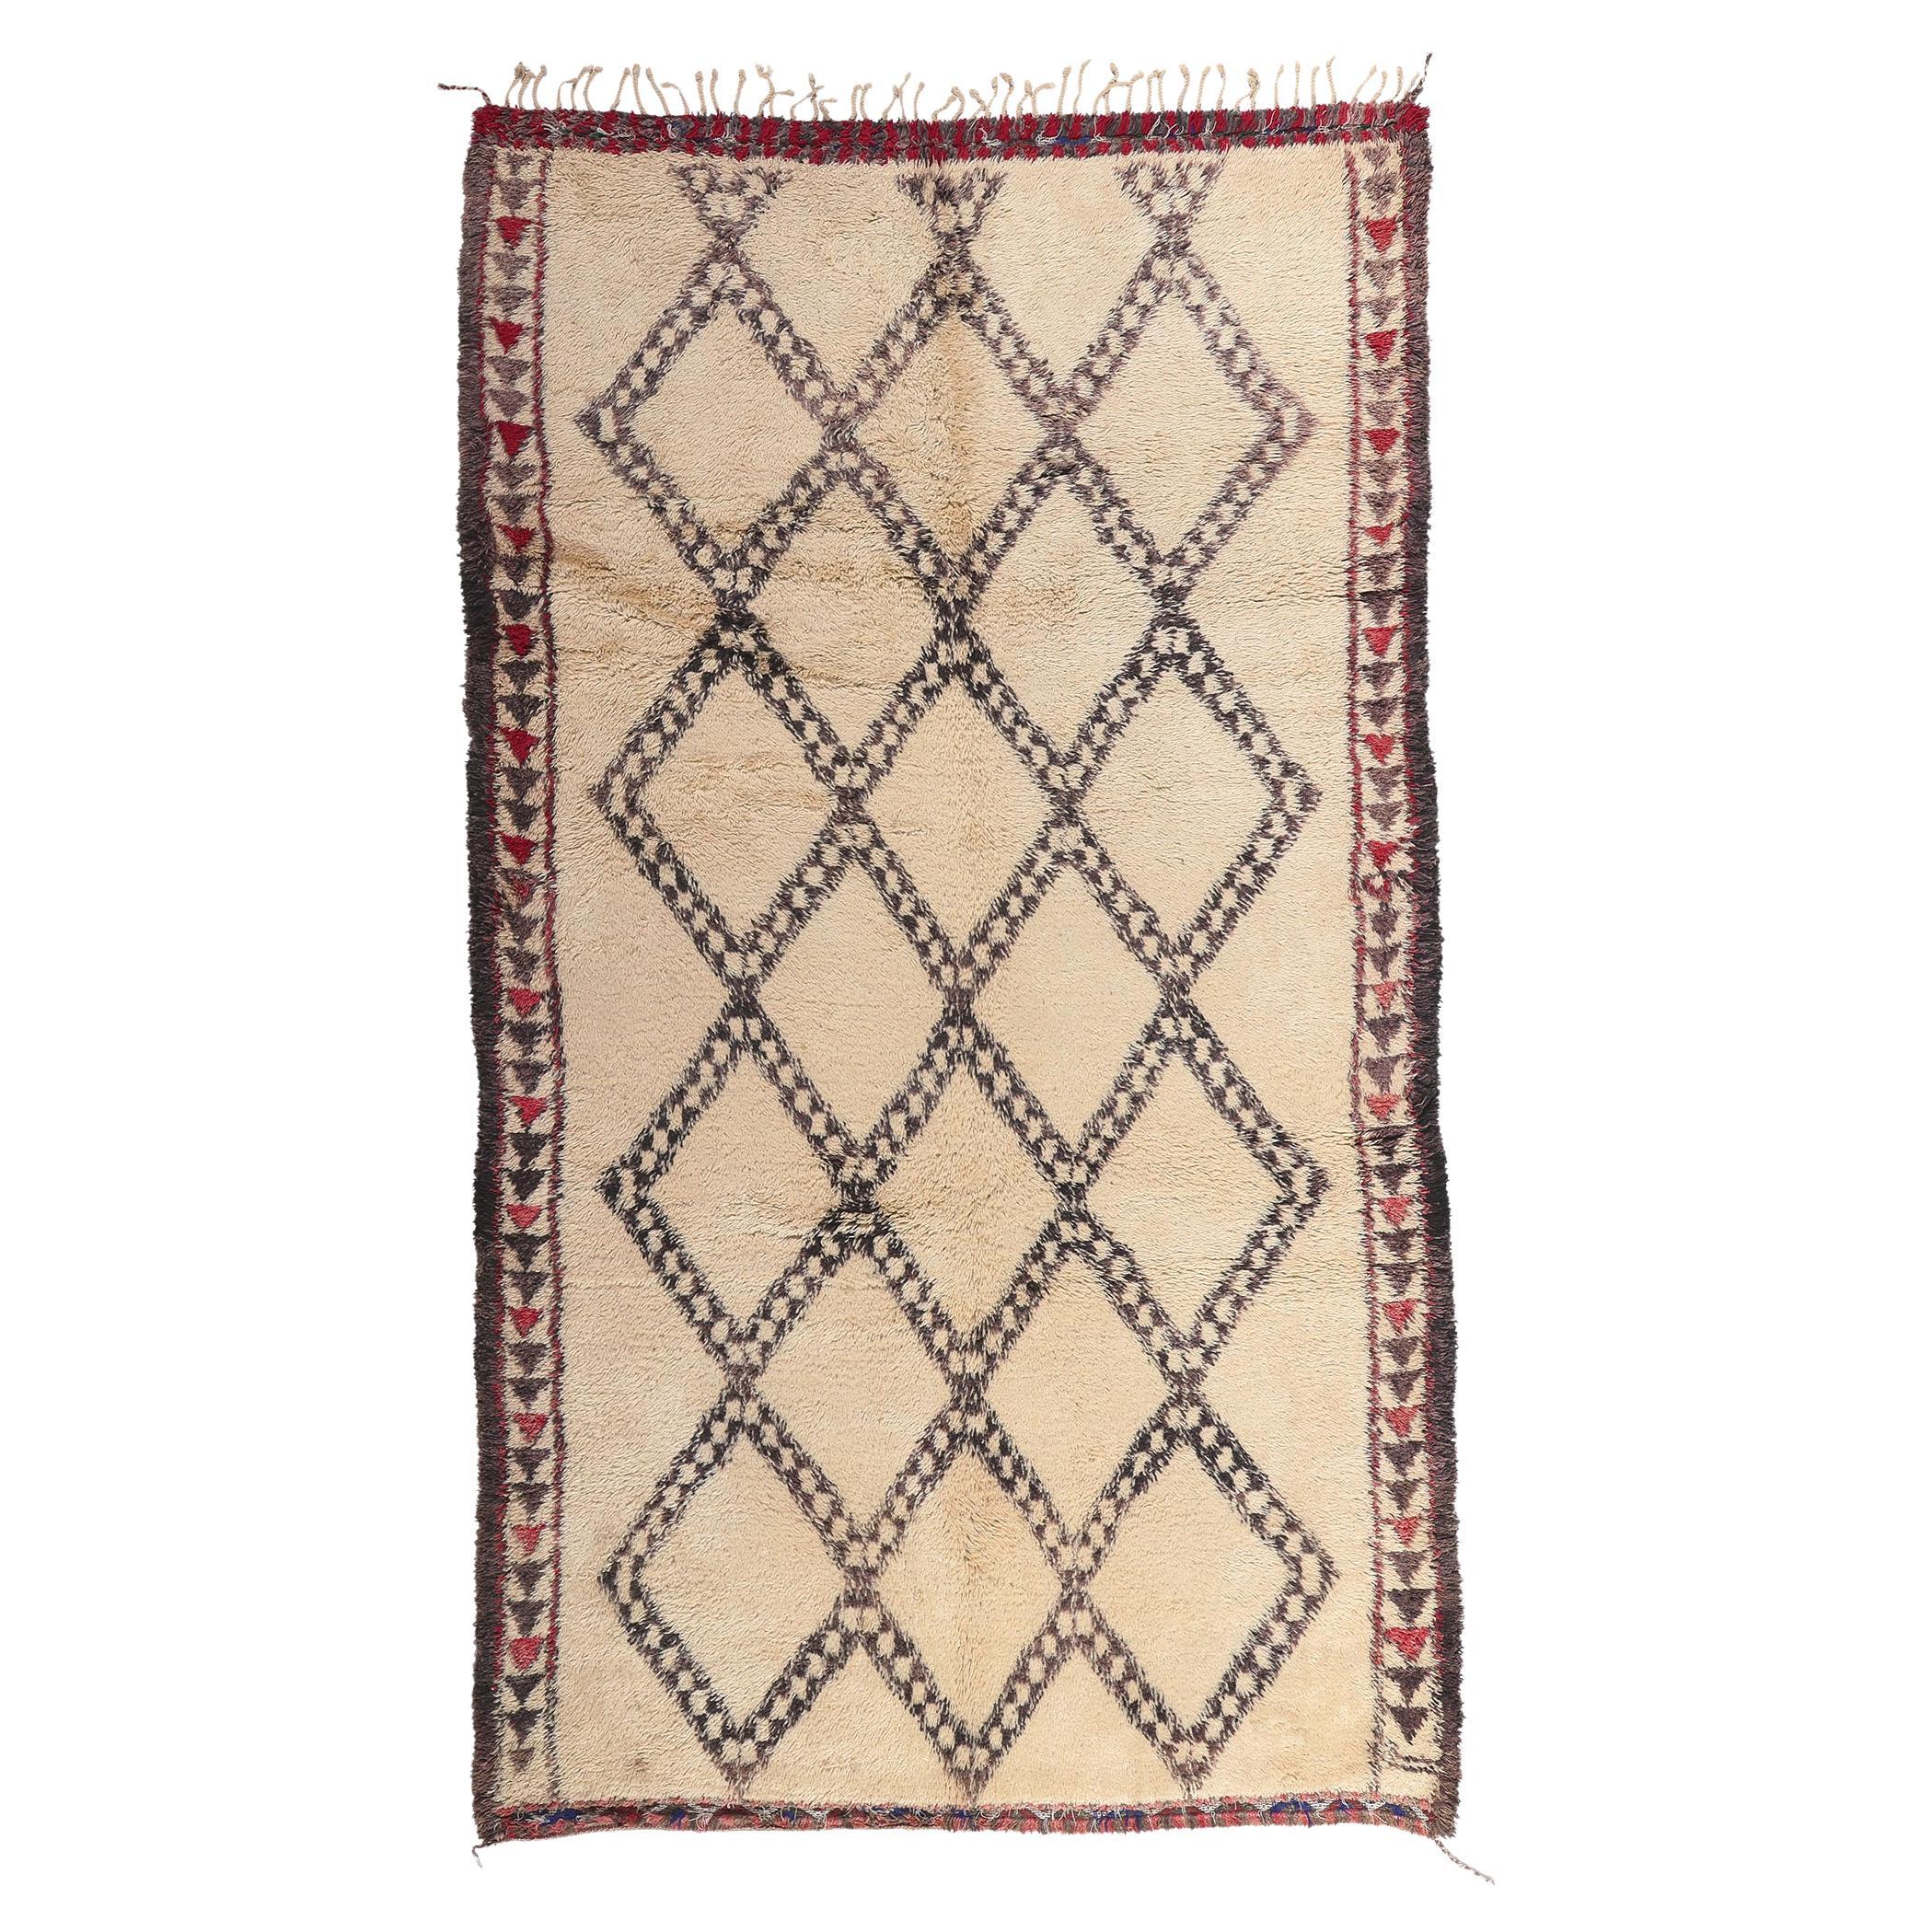 Vintage Moroccan Beni Ourain Rug, Cozy Nomad Meets Midcentury Modern Style For Sale